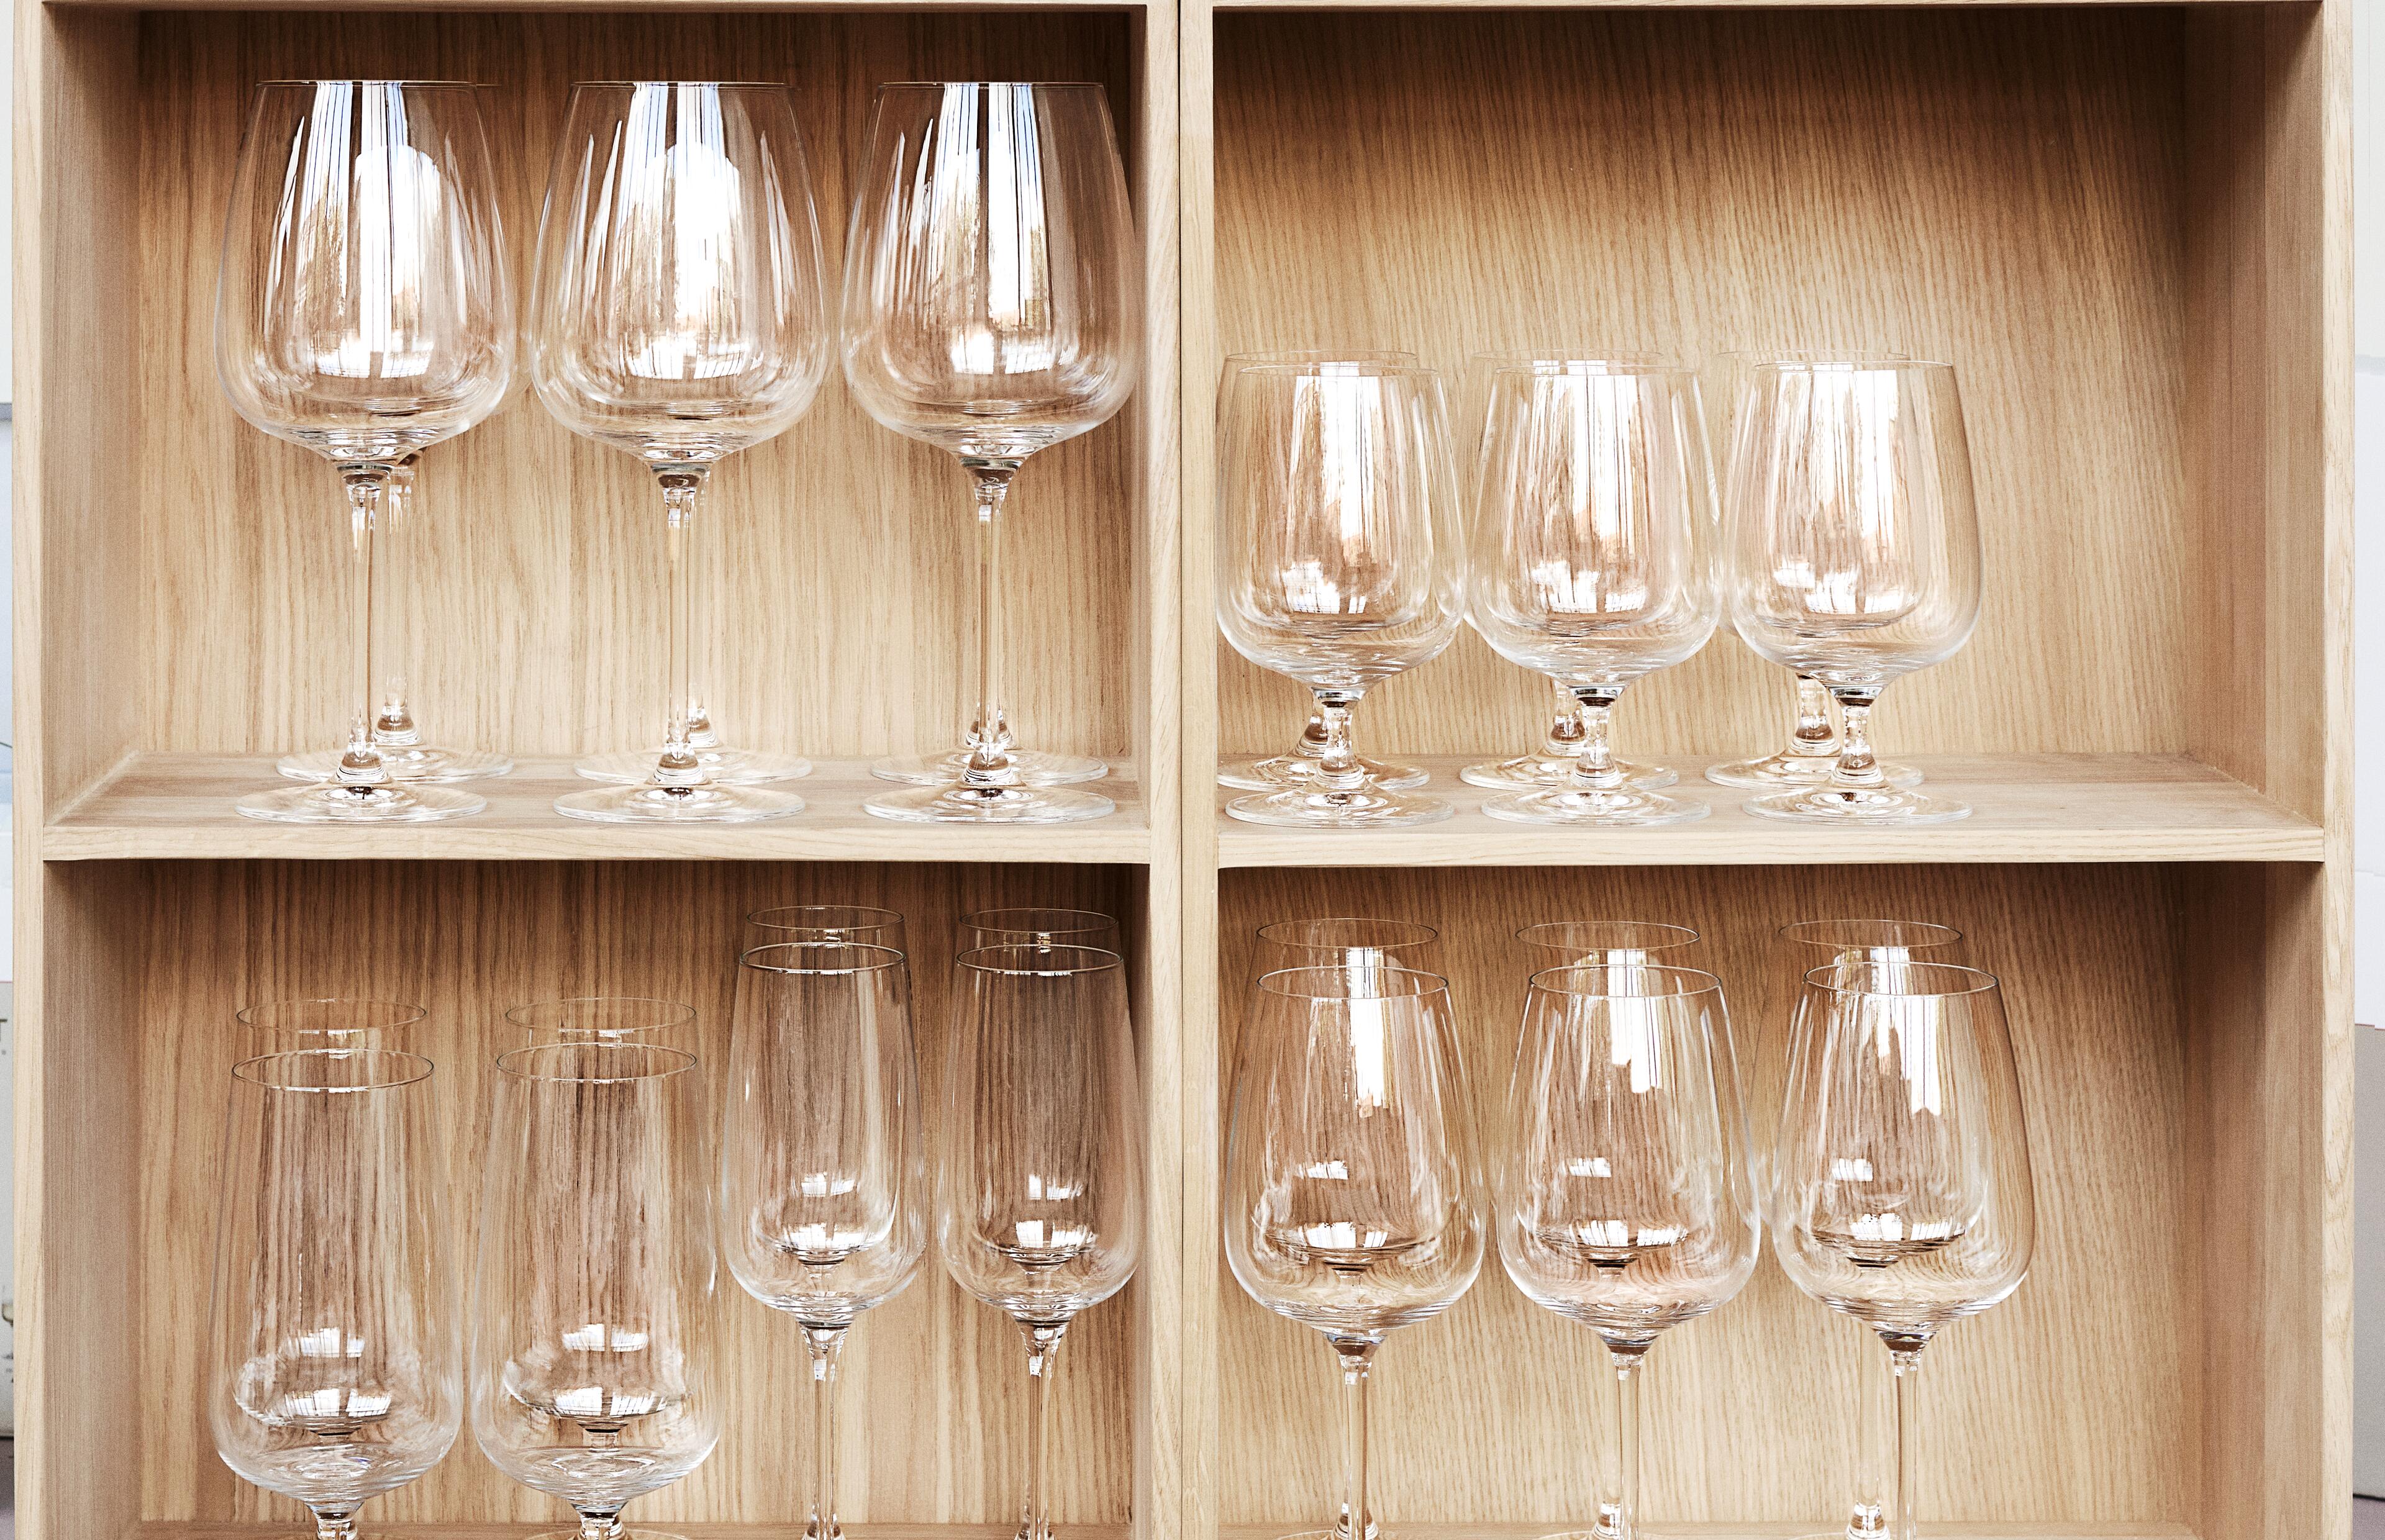 Six wine glasses from the Holmegaard Bouquet series